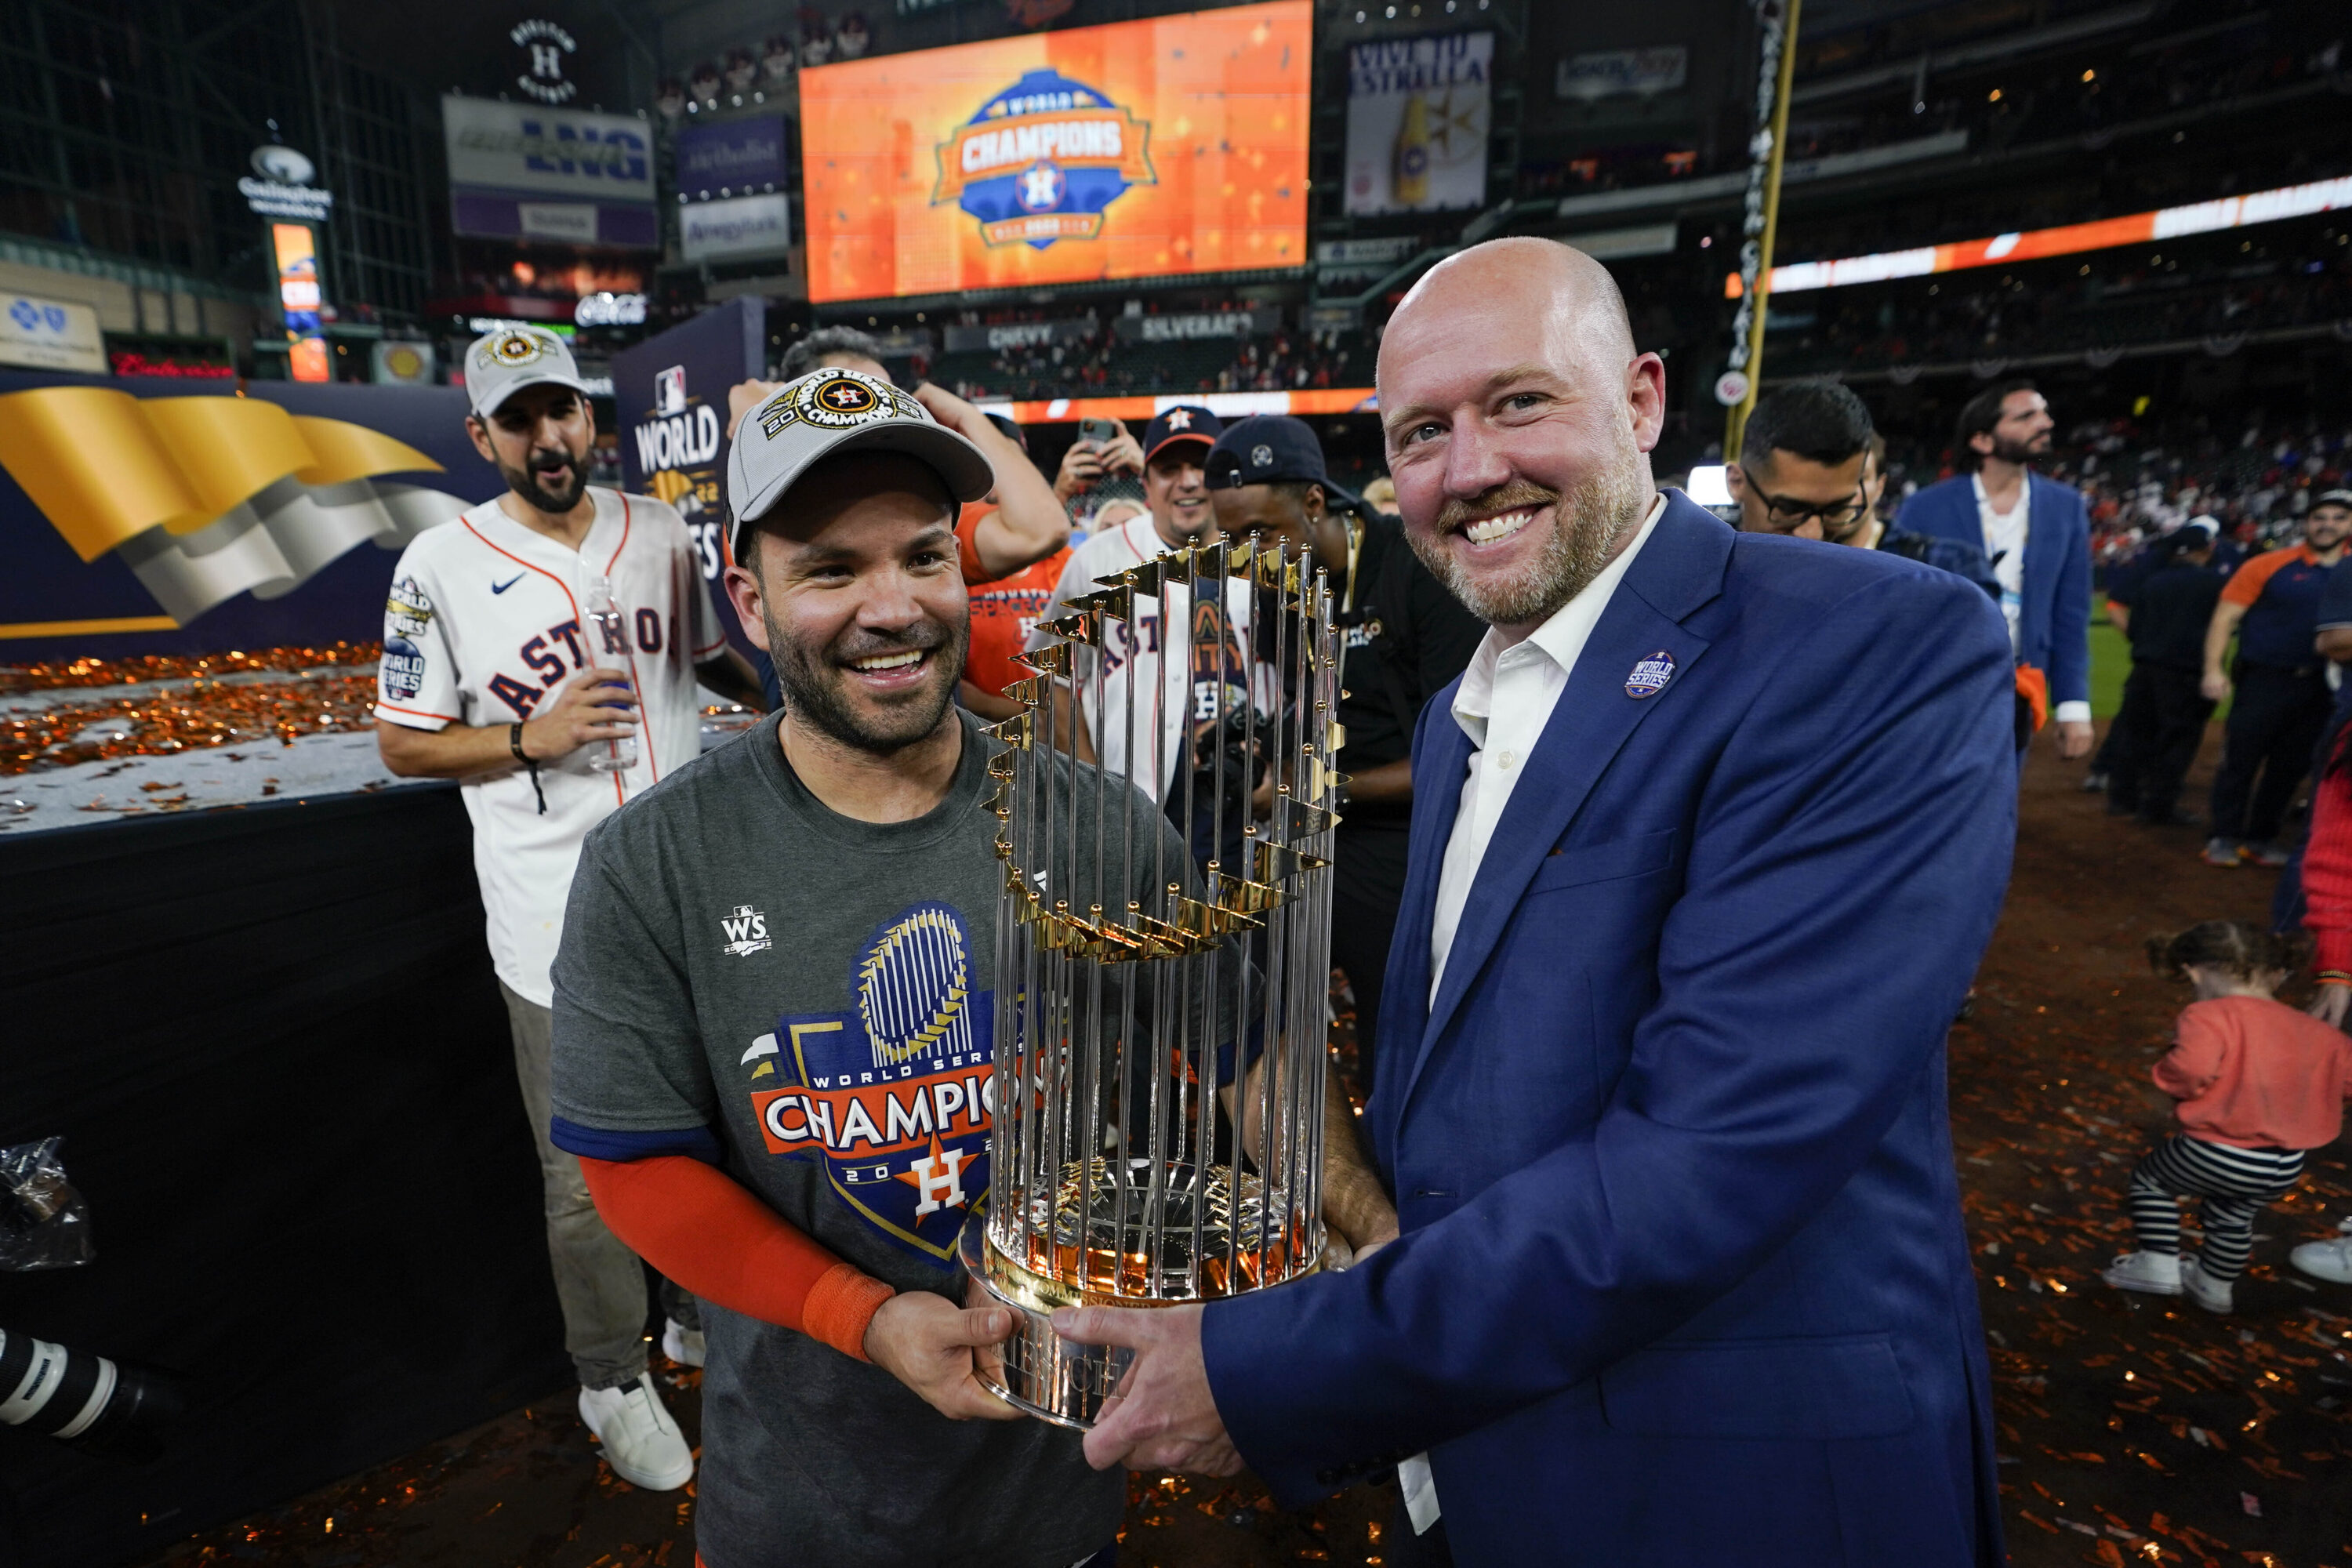 Houston Astros win World Series over Philadelphia Phillies with Game 6  victory